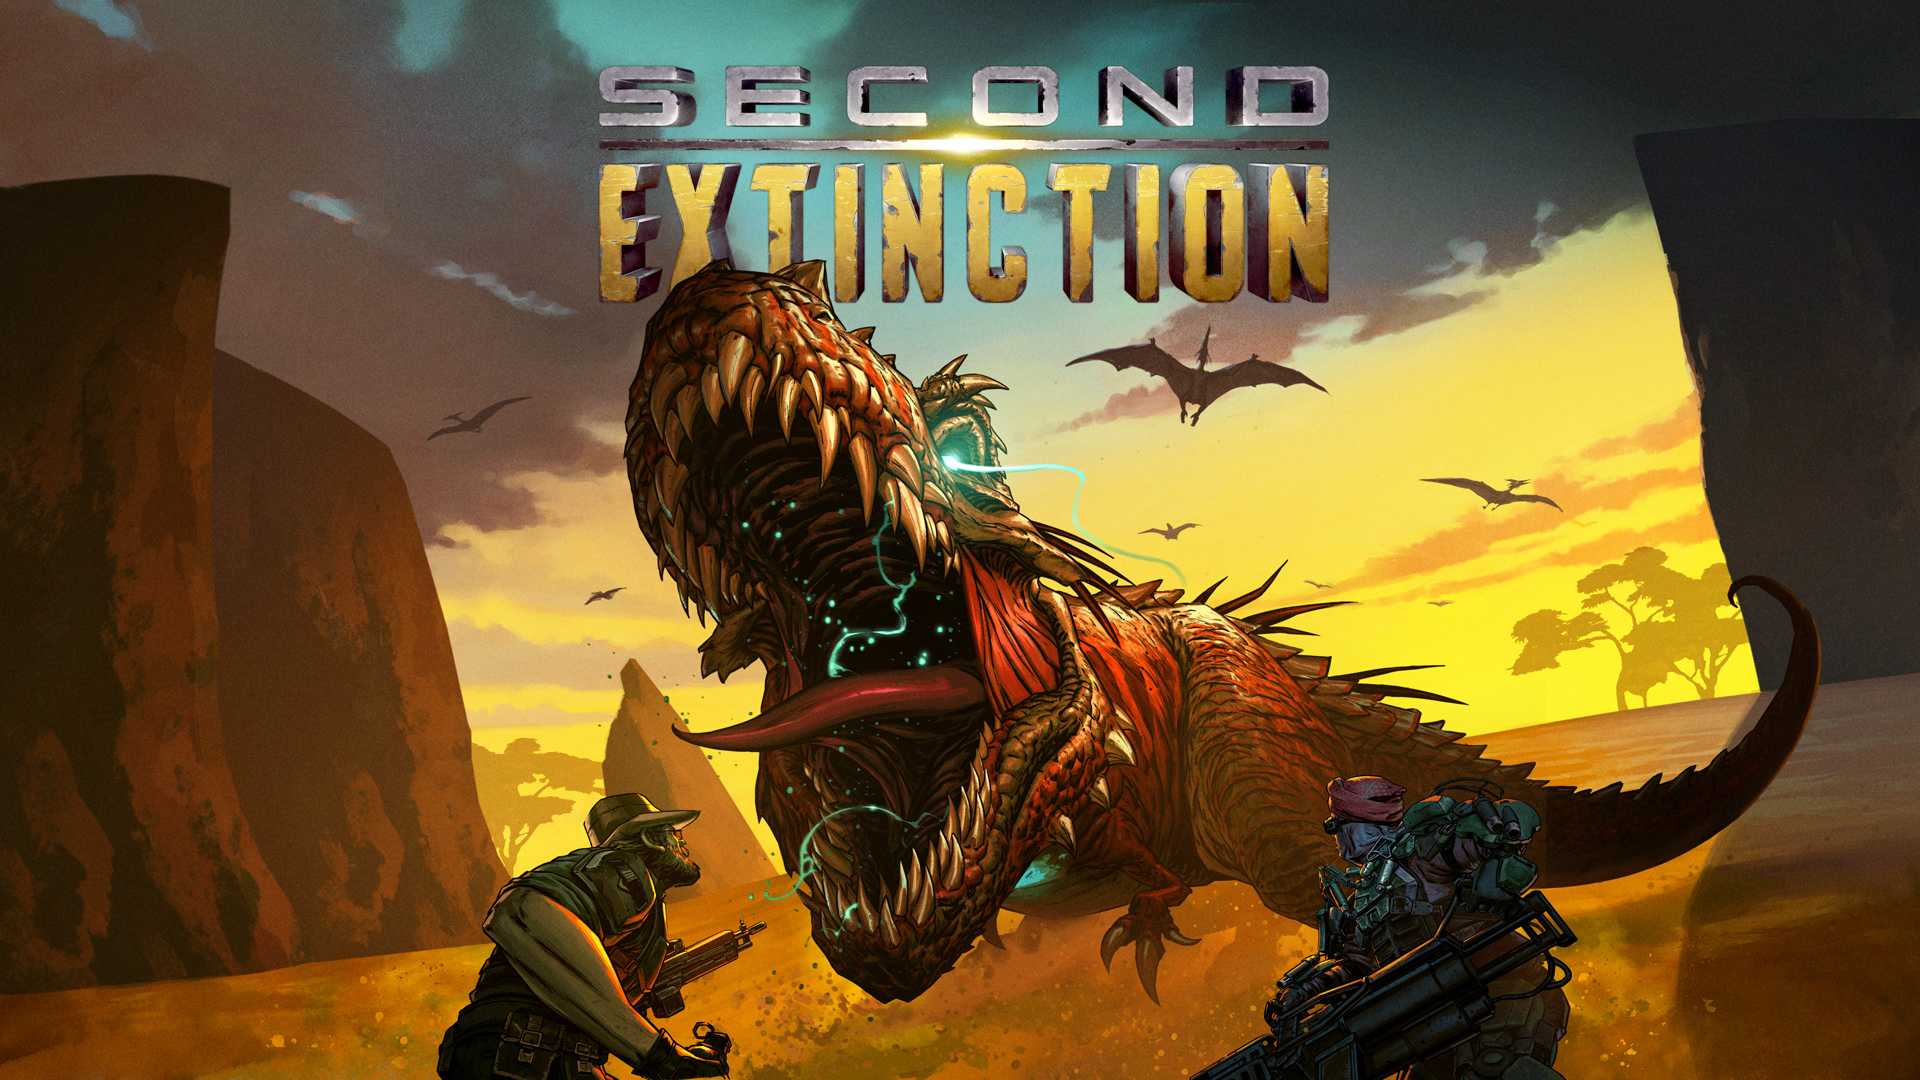 A Final Update on Second Extinction